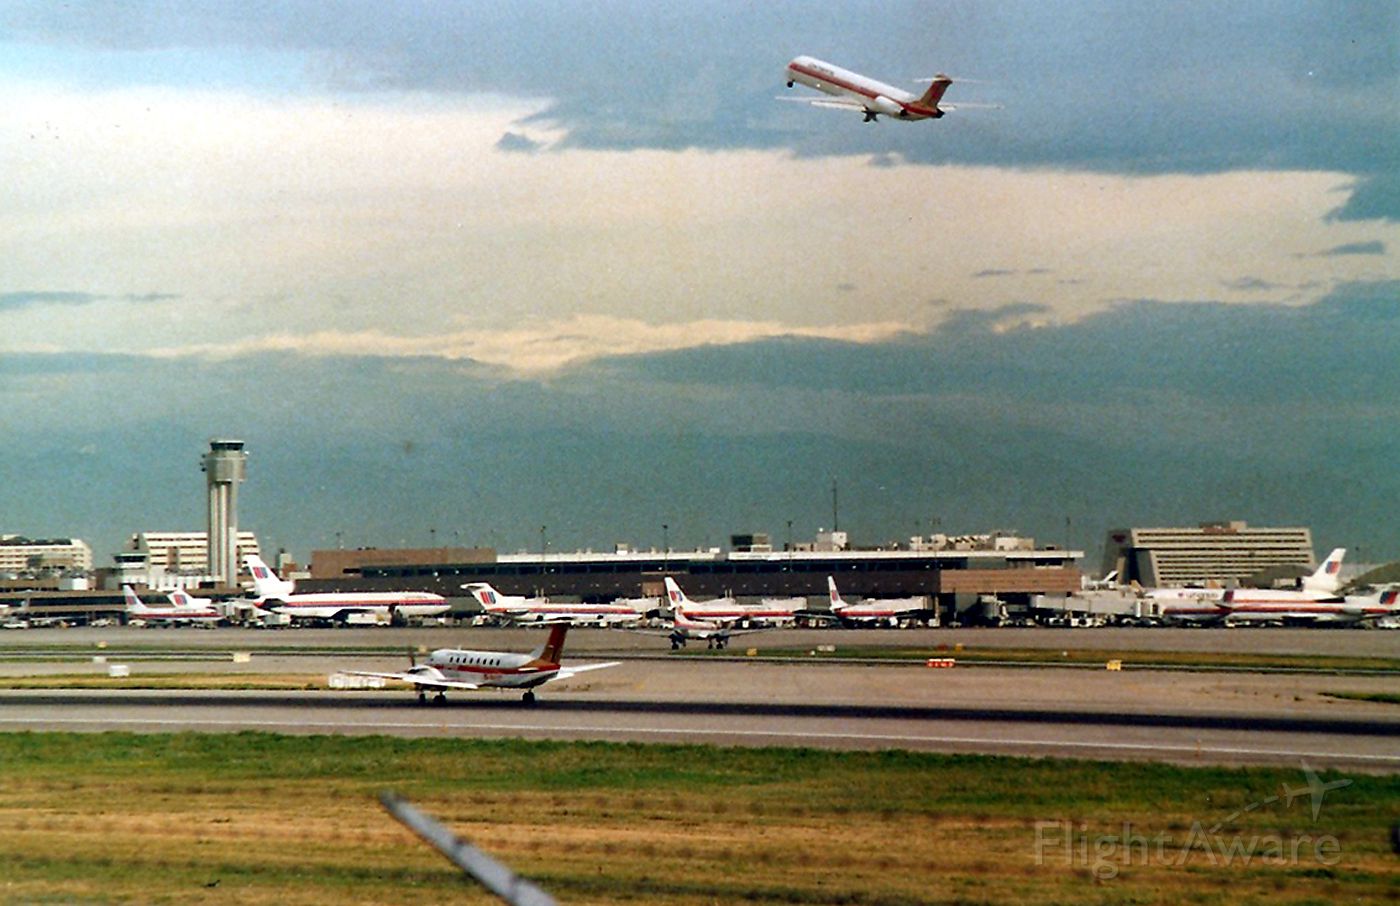 Beechcraft 19 Sport (N32017) - KDEN - Aug 1998 view of Stapleton - Note the MD-80 performing a wheels up go around, as the UAL Convair 580 ( right of the B-1900 middle runway ) The MD-80 was touching down and then immediately lifted as the UAL 580 had not cleared he runway yet - and I don't know why - poss missed a high speed. Anyways, everything just froze on the runways and taxi ways until ATC cleared everybody. I had 3 hours this AM to film and foto at Stapleton, and this was one busy airport - even Aug 1988 standards.